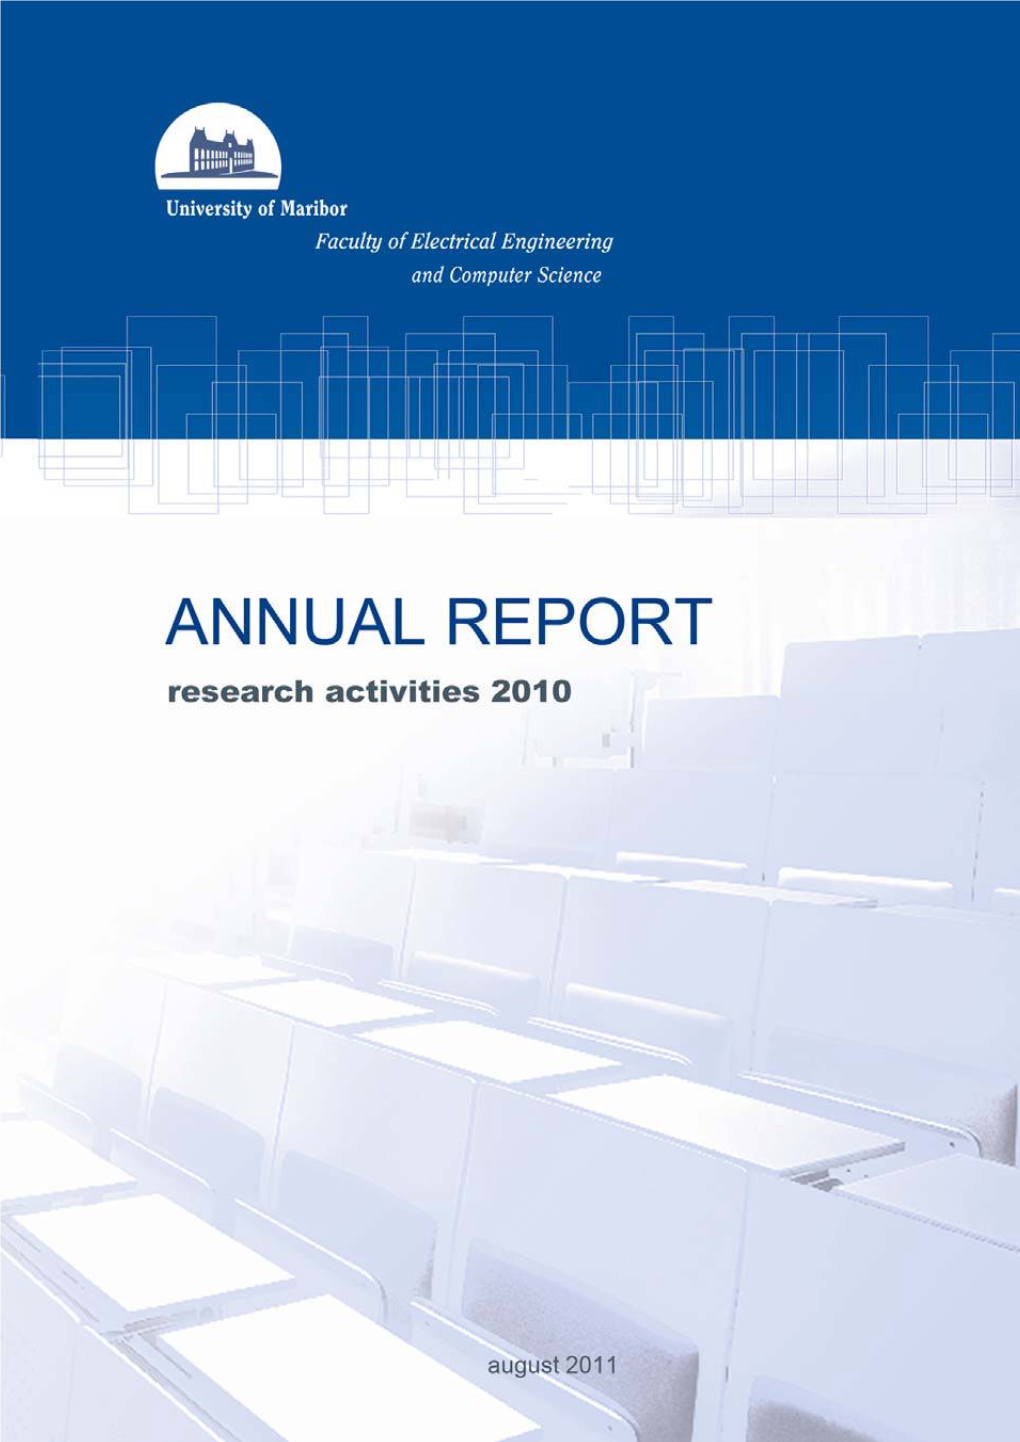 Annual Report on Research Activities for Year 2010